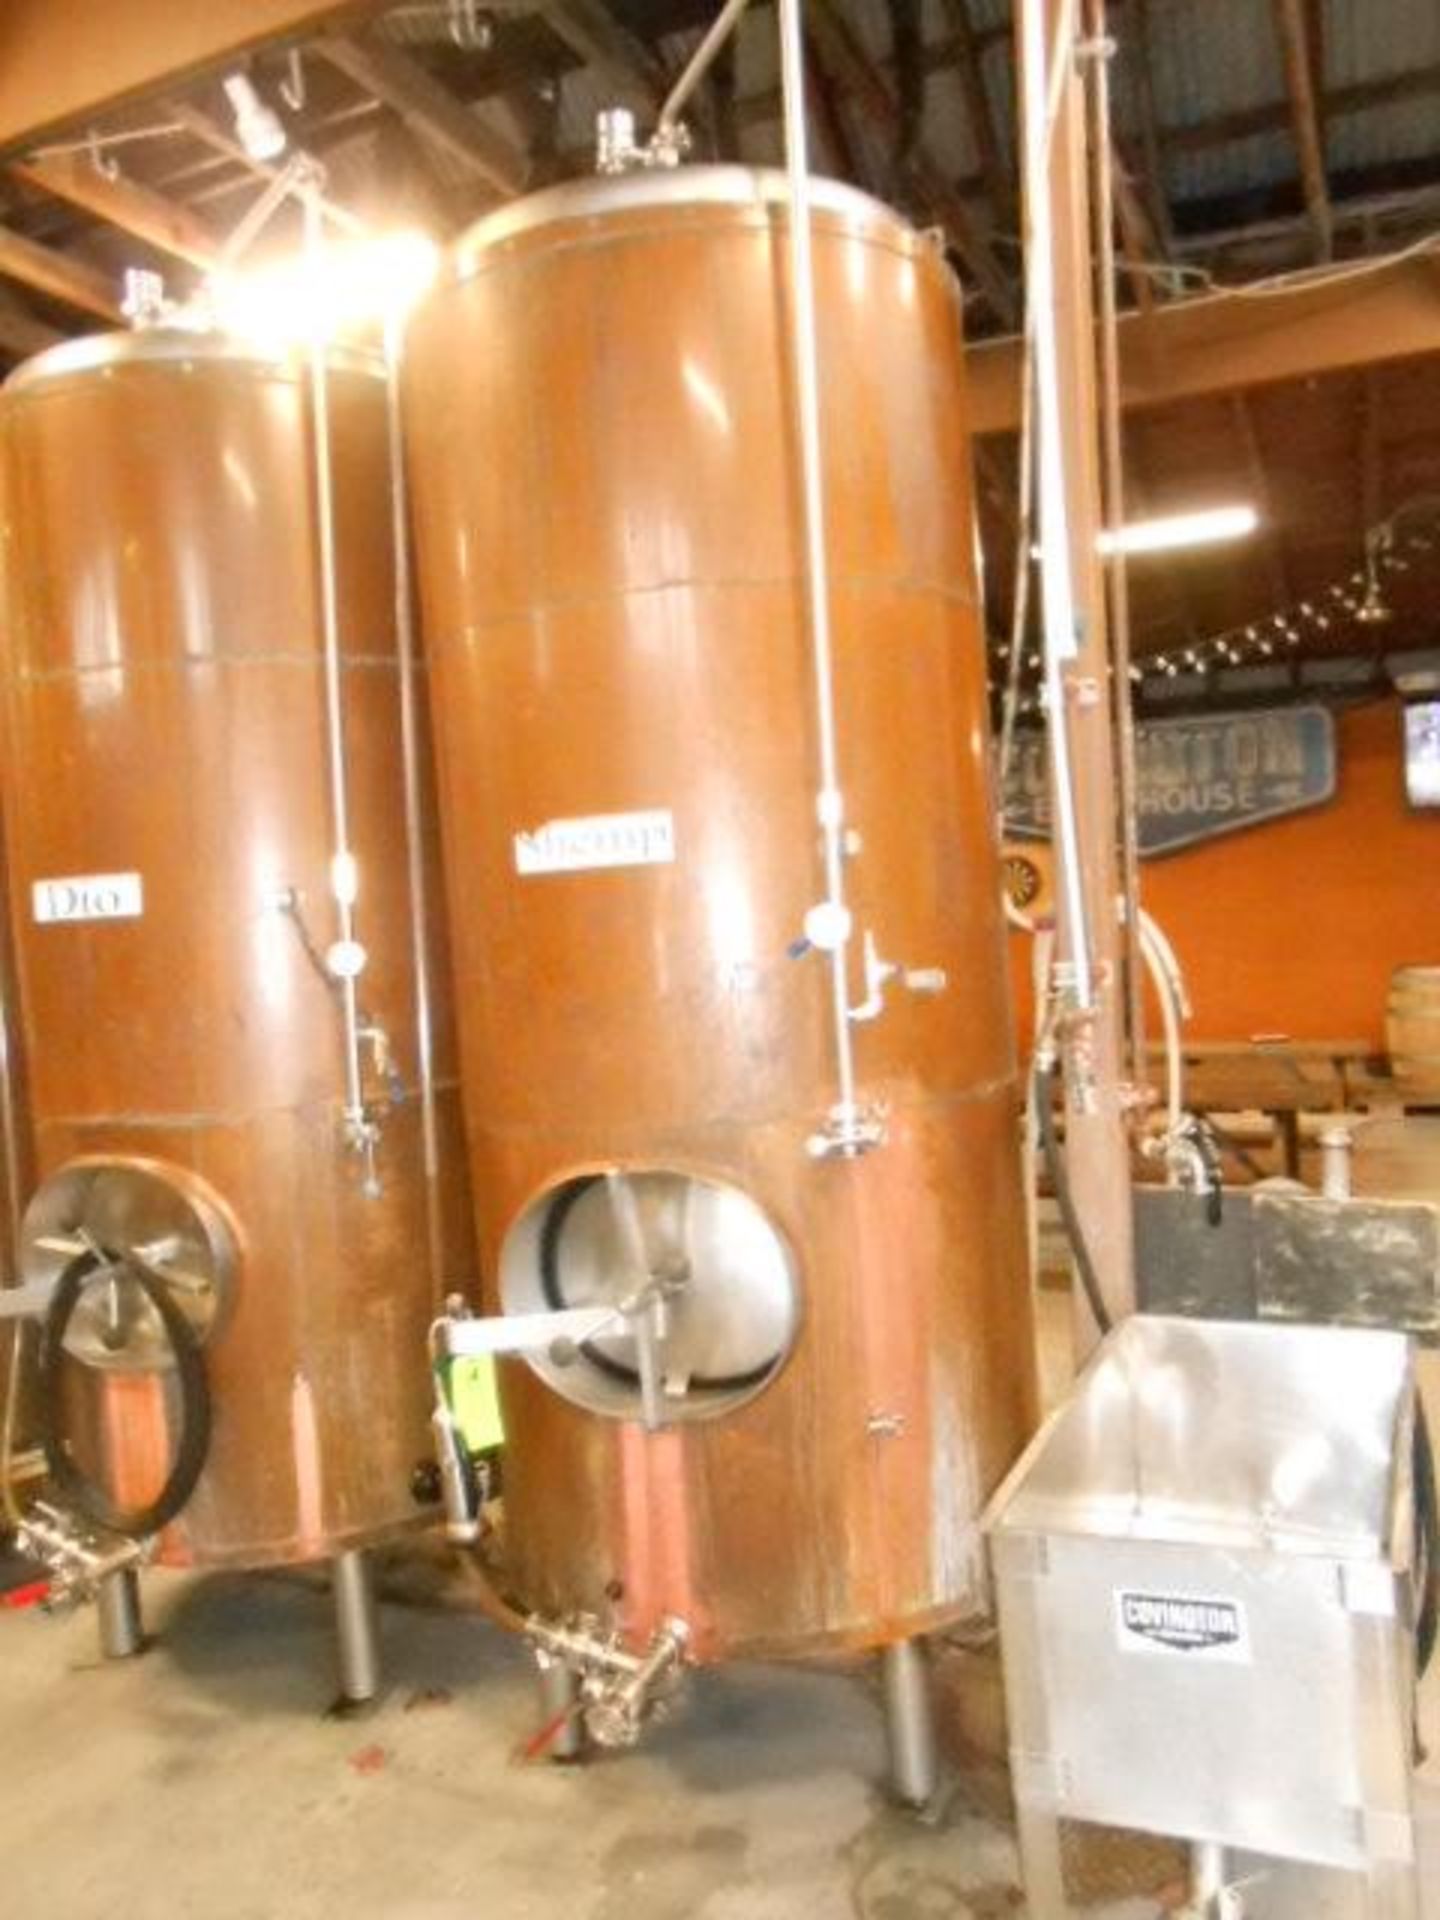 The Pub Brewing Company stainless steel glycol jacket 15 bbl. brite tank insulated with copper